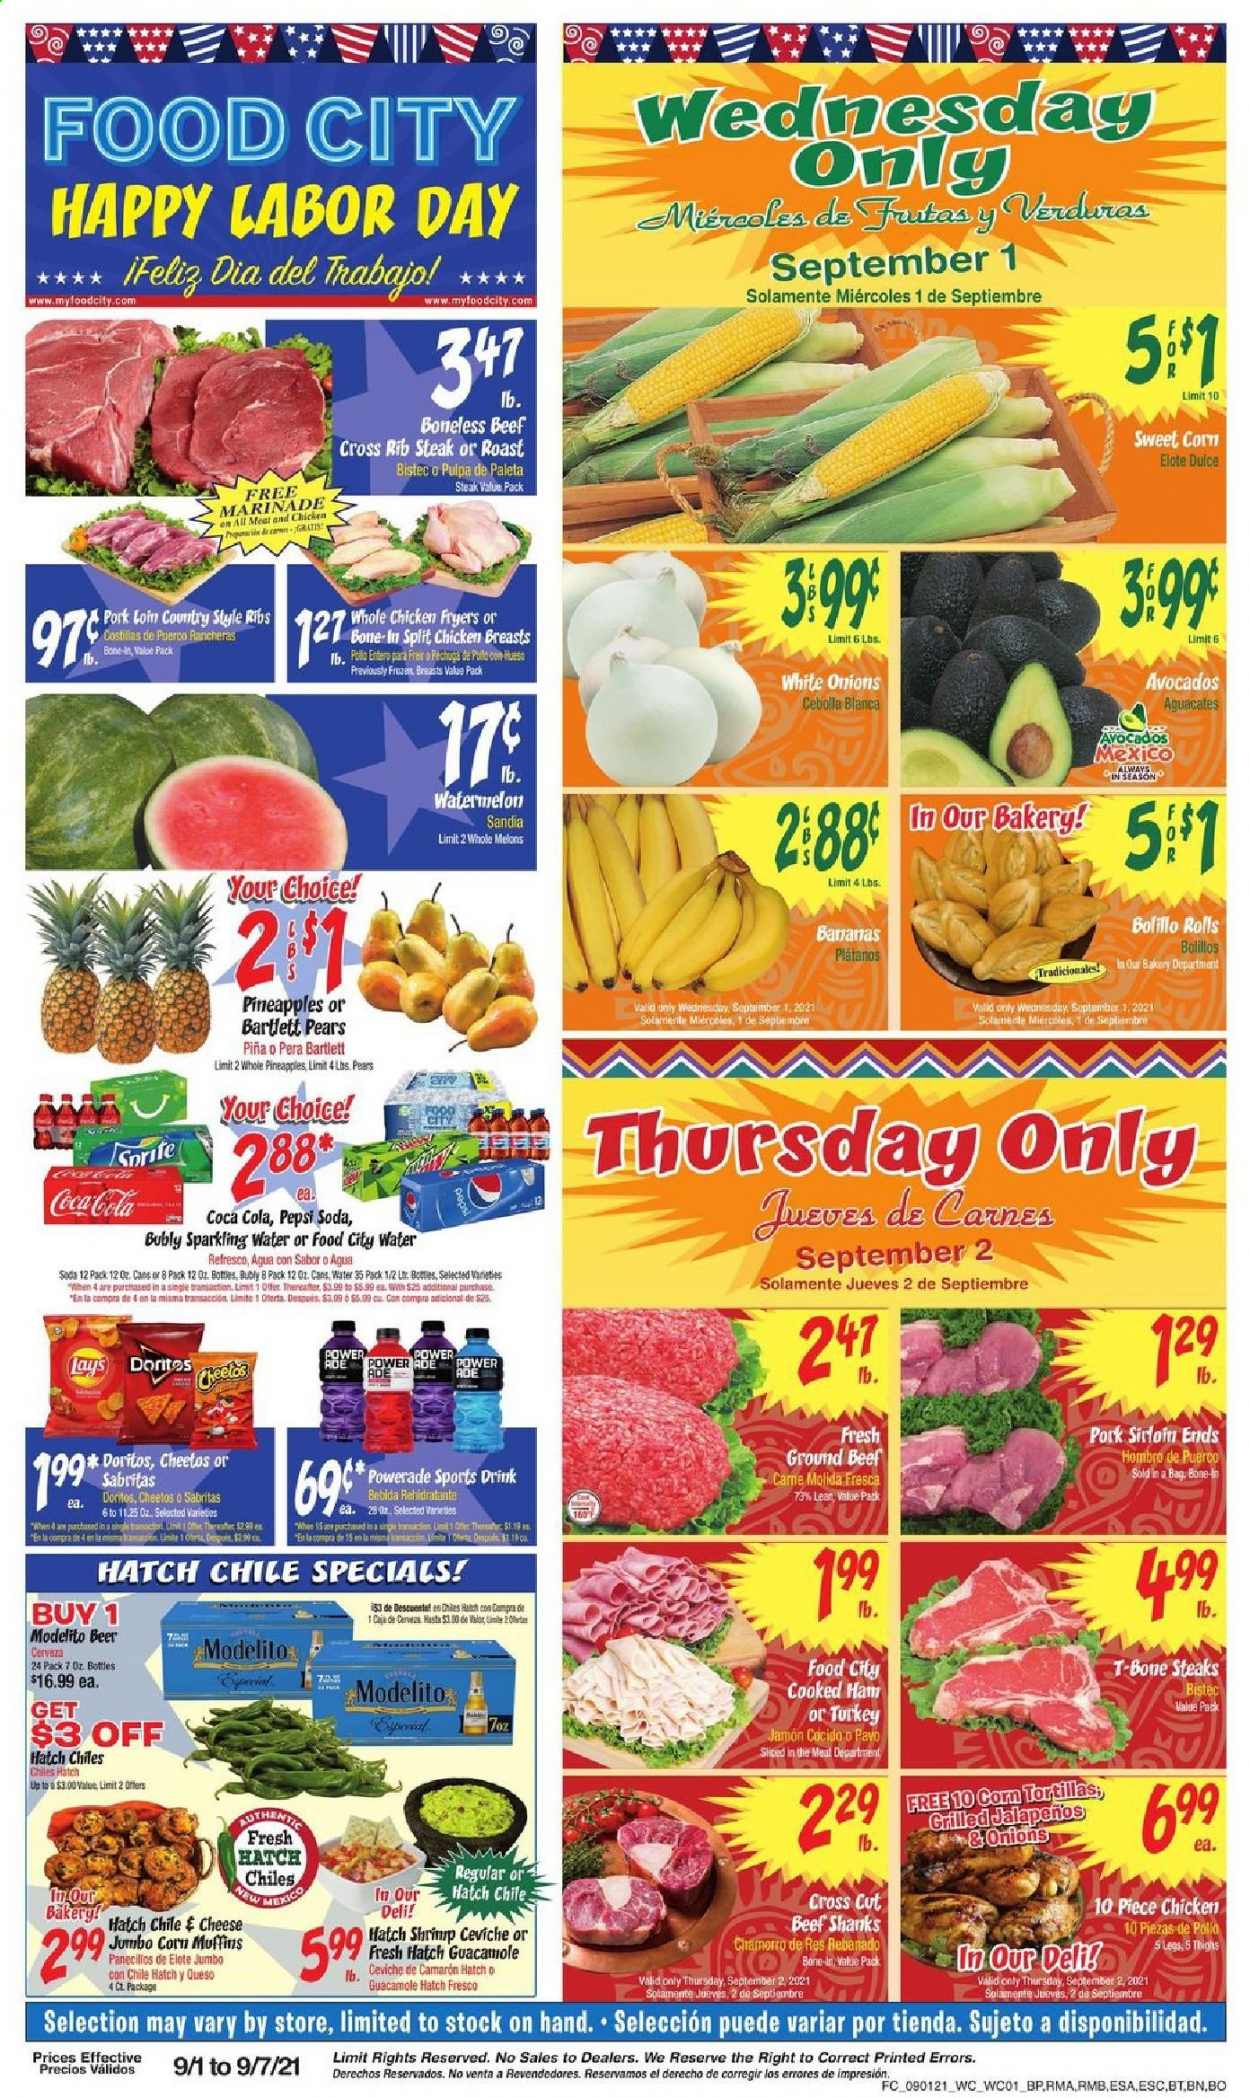 thumbnail - Food City Flyer - 09/01/2021 - 09/07/2021 - Sales products - Bartlett pears, corn tortillas, tortillas, muffin, bananas, watermelon, pineapple, pears, cooked ham, ham, guacamole, cheese, Doritos, Cheetos, Lay’s, marinade, Coca-Cola, Powerade, Pepsi, soda, sparkling water, beer, whole chicken, chicken breasts, beef meat, ground beef, t-bone steak, steak, pork loin, pork meat, pork ribs, country style ribs, melons. Page 1.